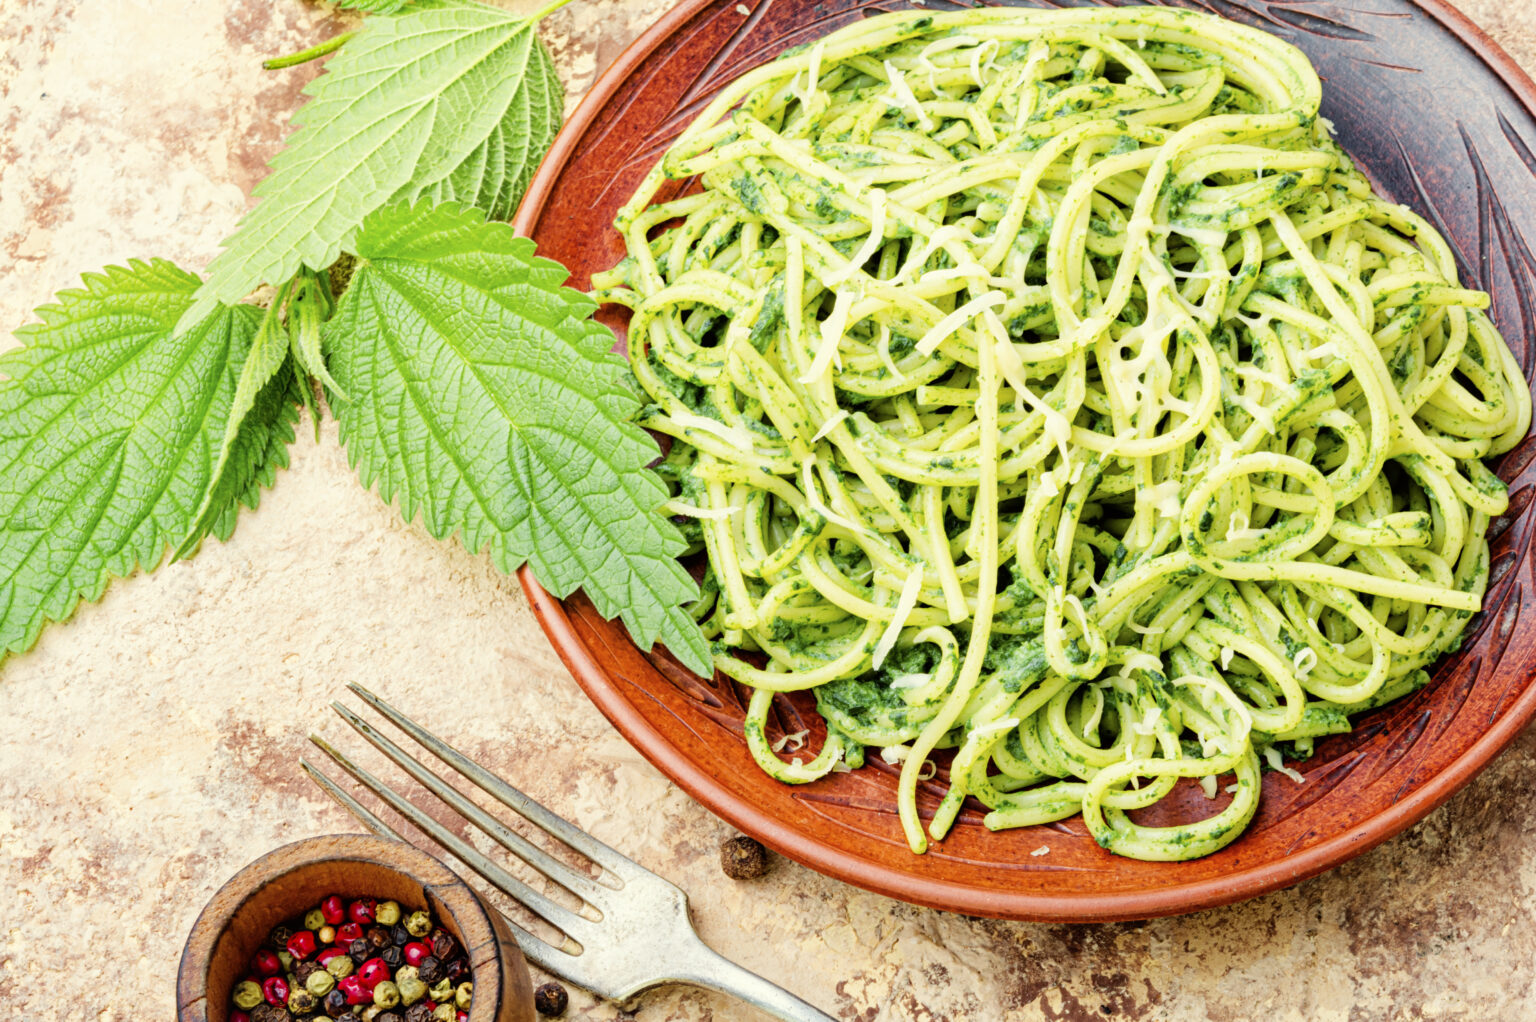 Italian traditional pasta with nettle sauce.Vegetarian green pasta with nettle leaves.